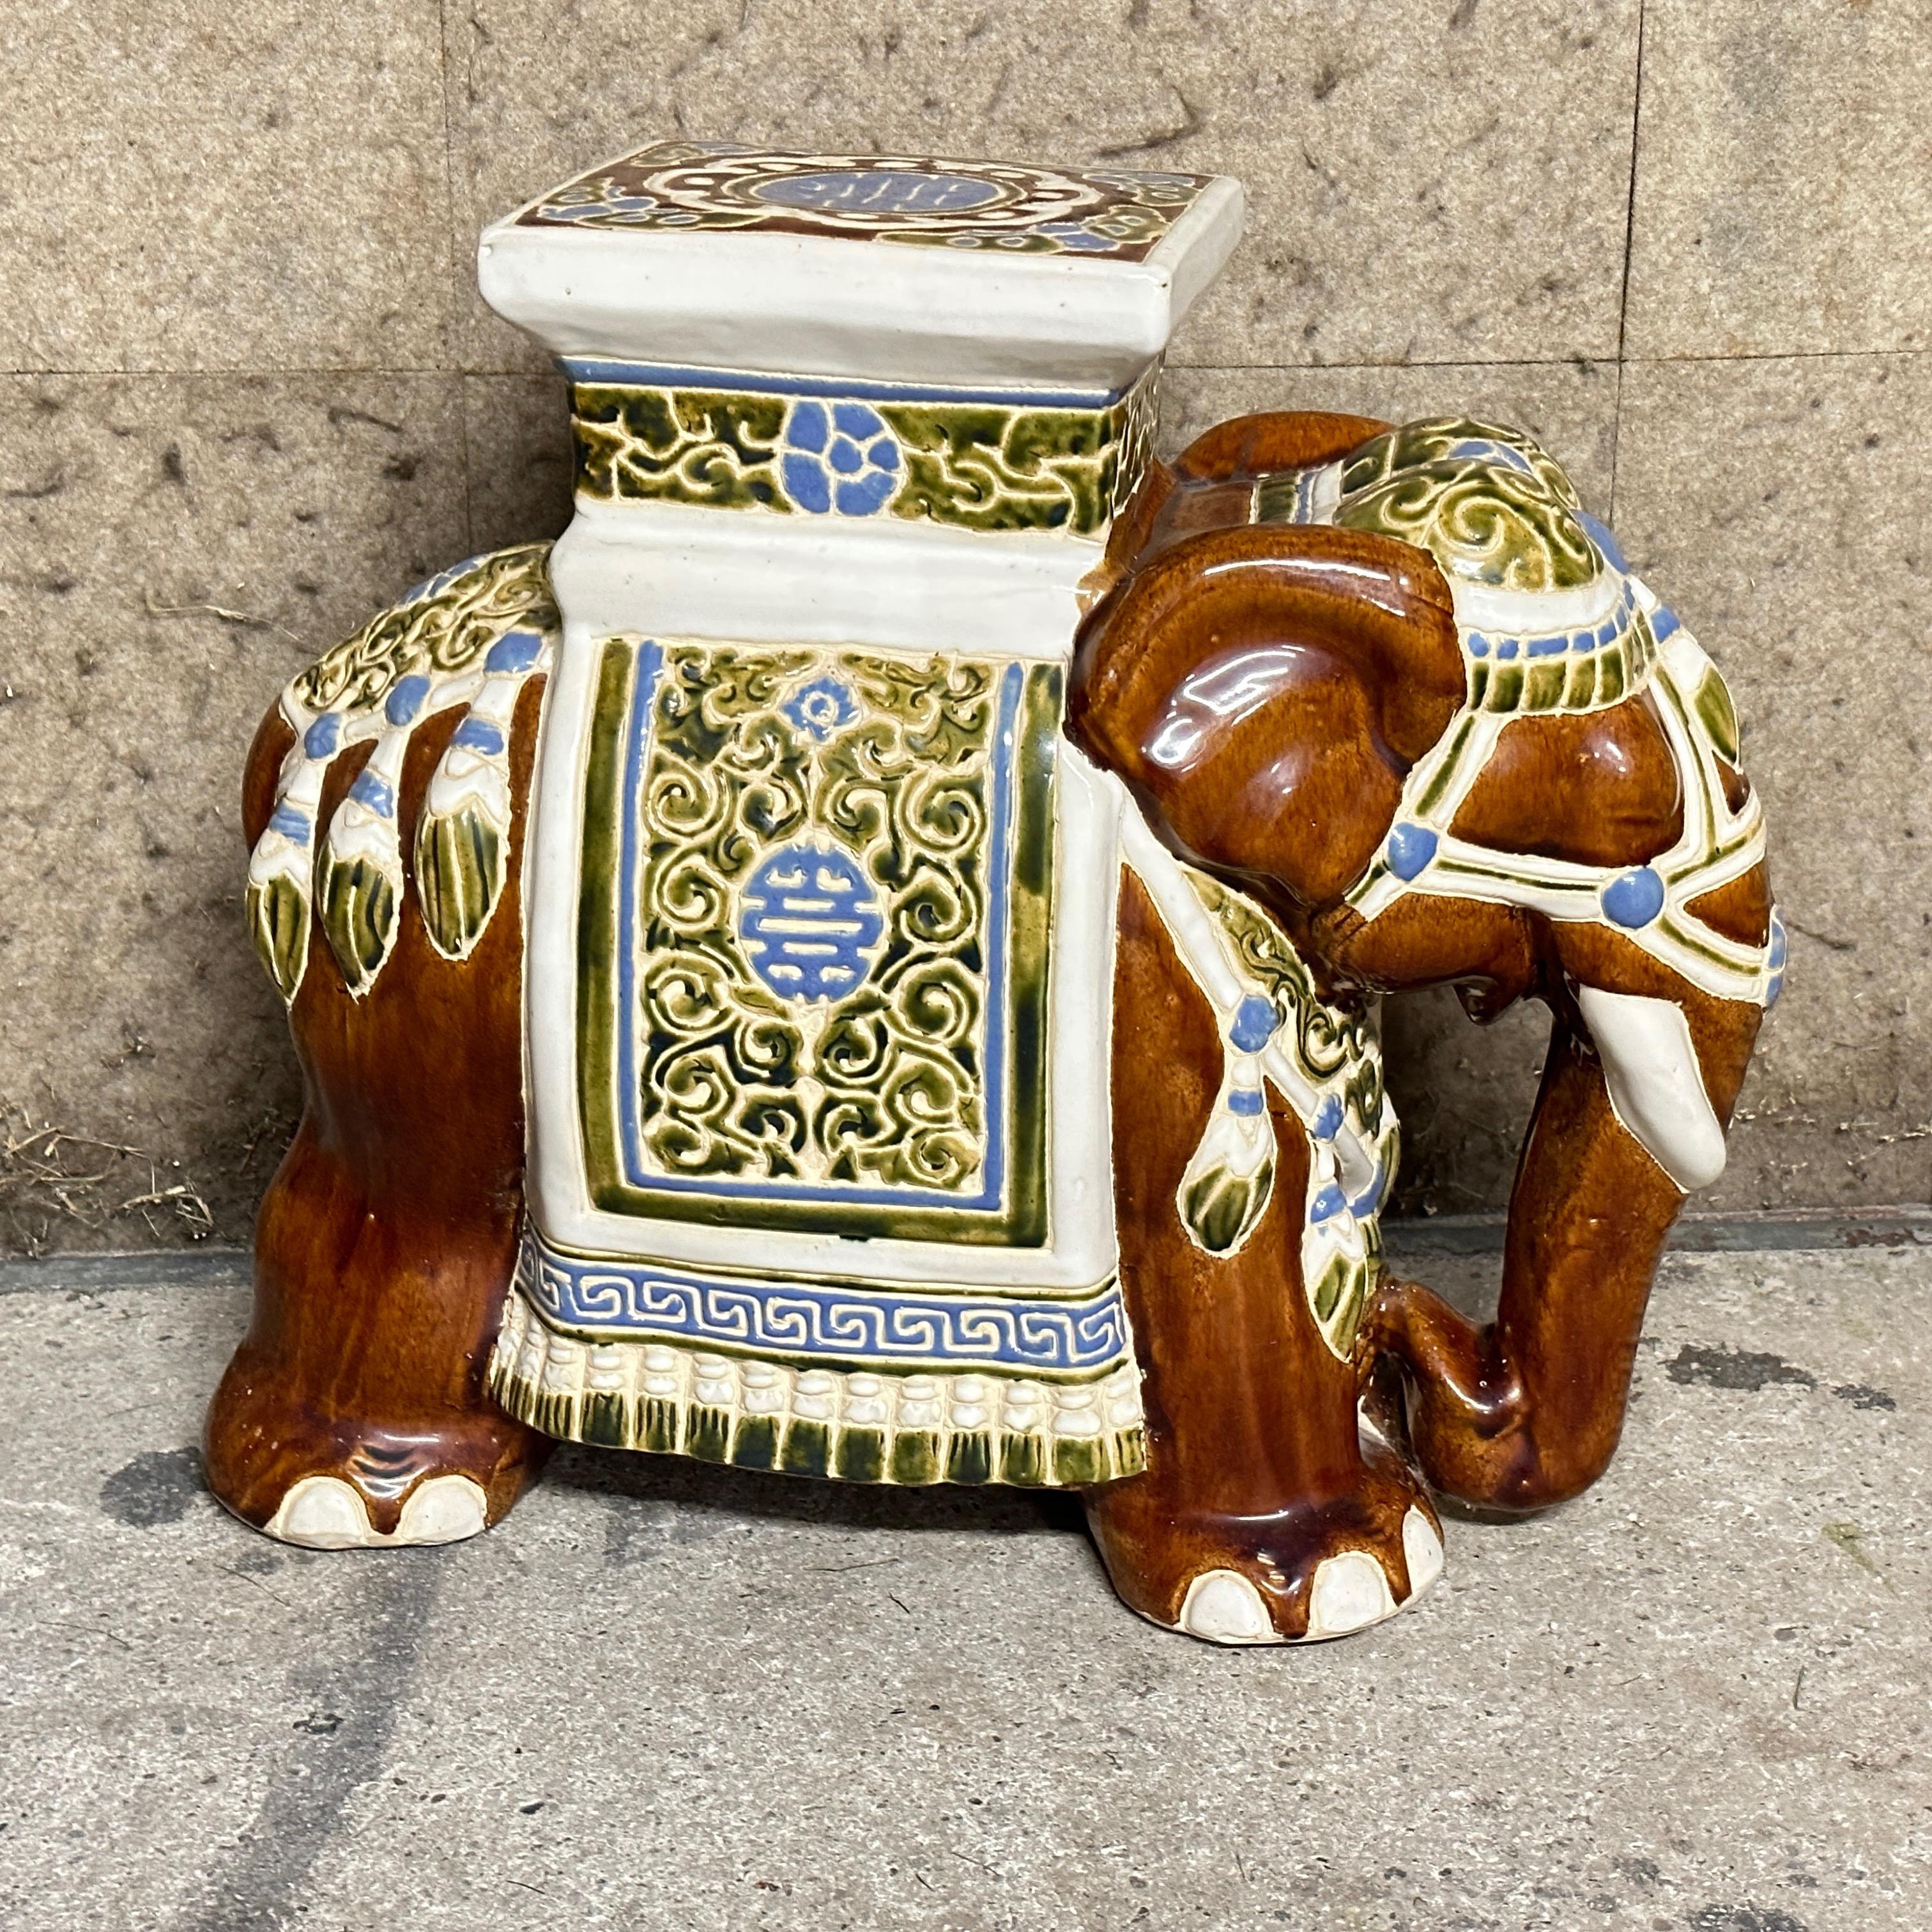 Mid-20th century glazed ceramic elephant garden stool, flower pot seat or side table. Handmade of ceramic. Nice addition to your home, patio or garden. Also nice in your pool area to hold your personal belongings. Found at an estate sale in Vienna,